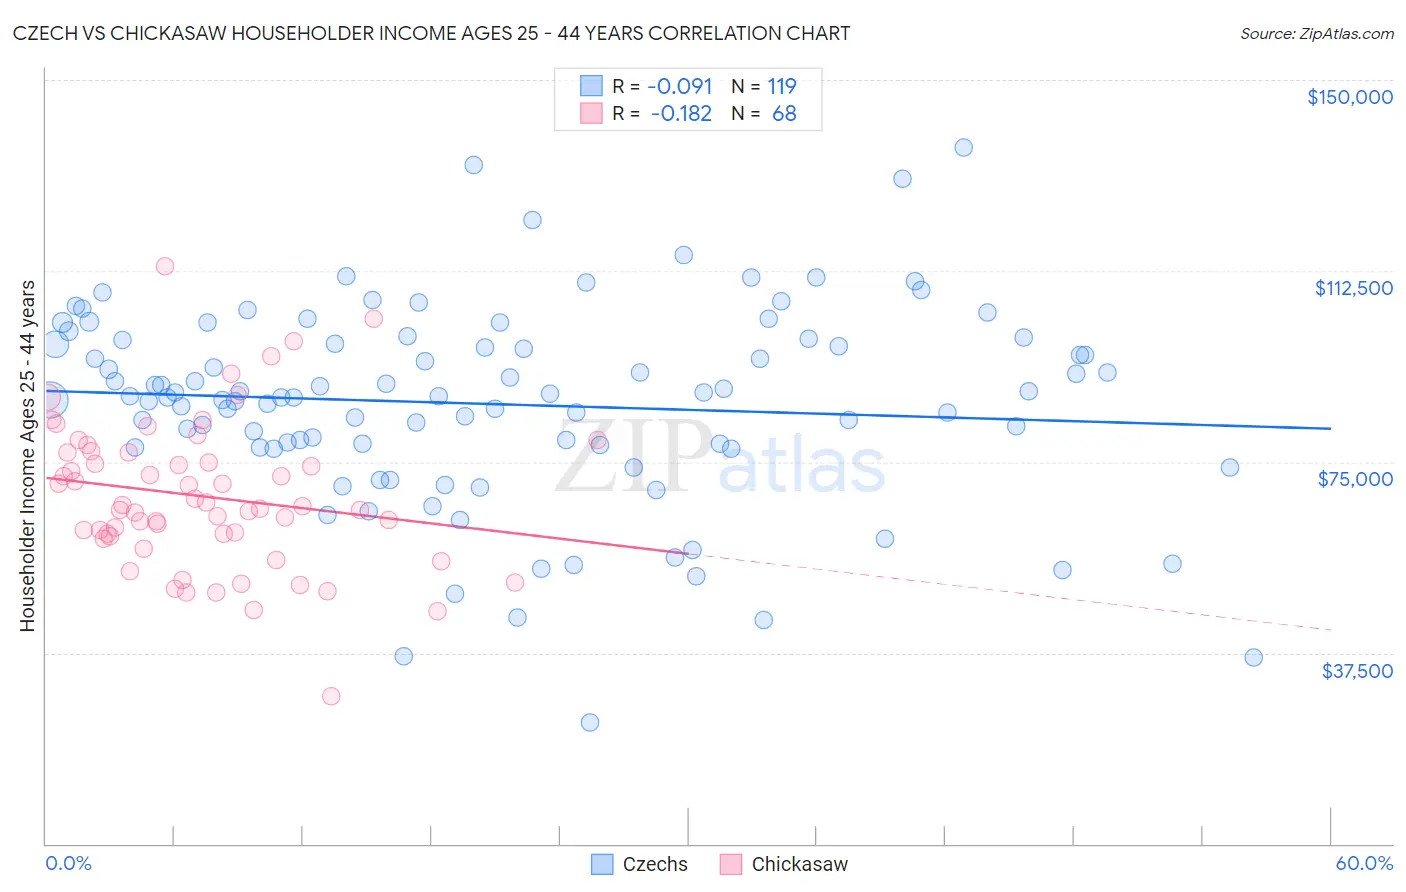 Czech vs Chickasaw Householder Income Ages 25 - 44 years